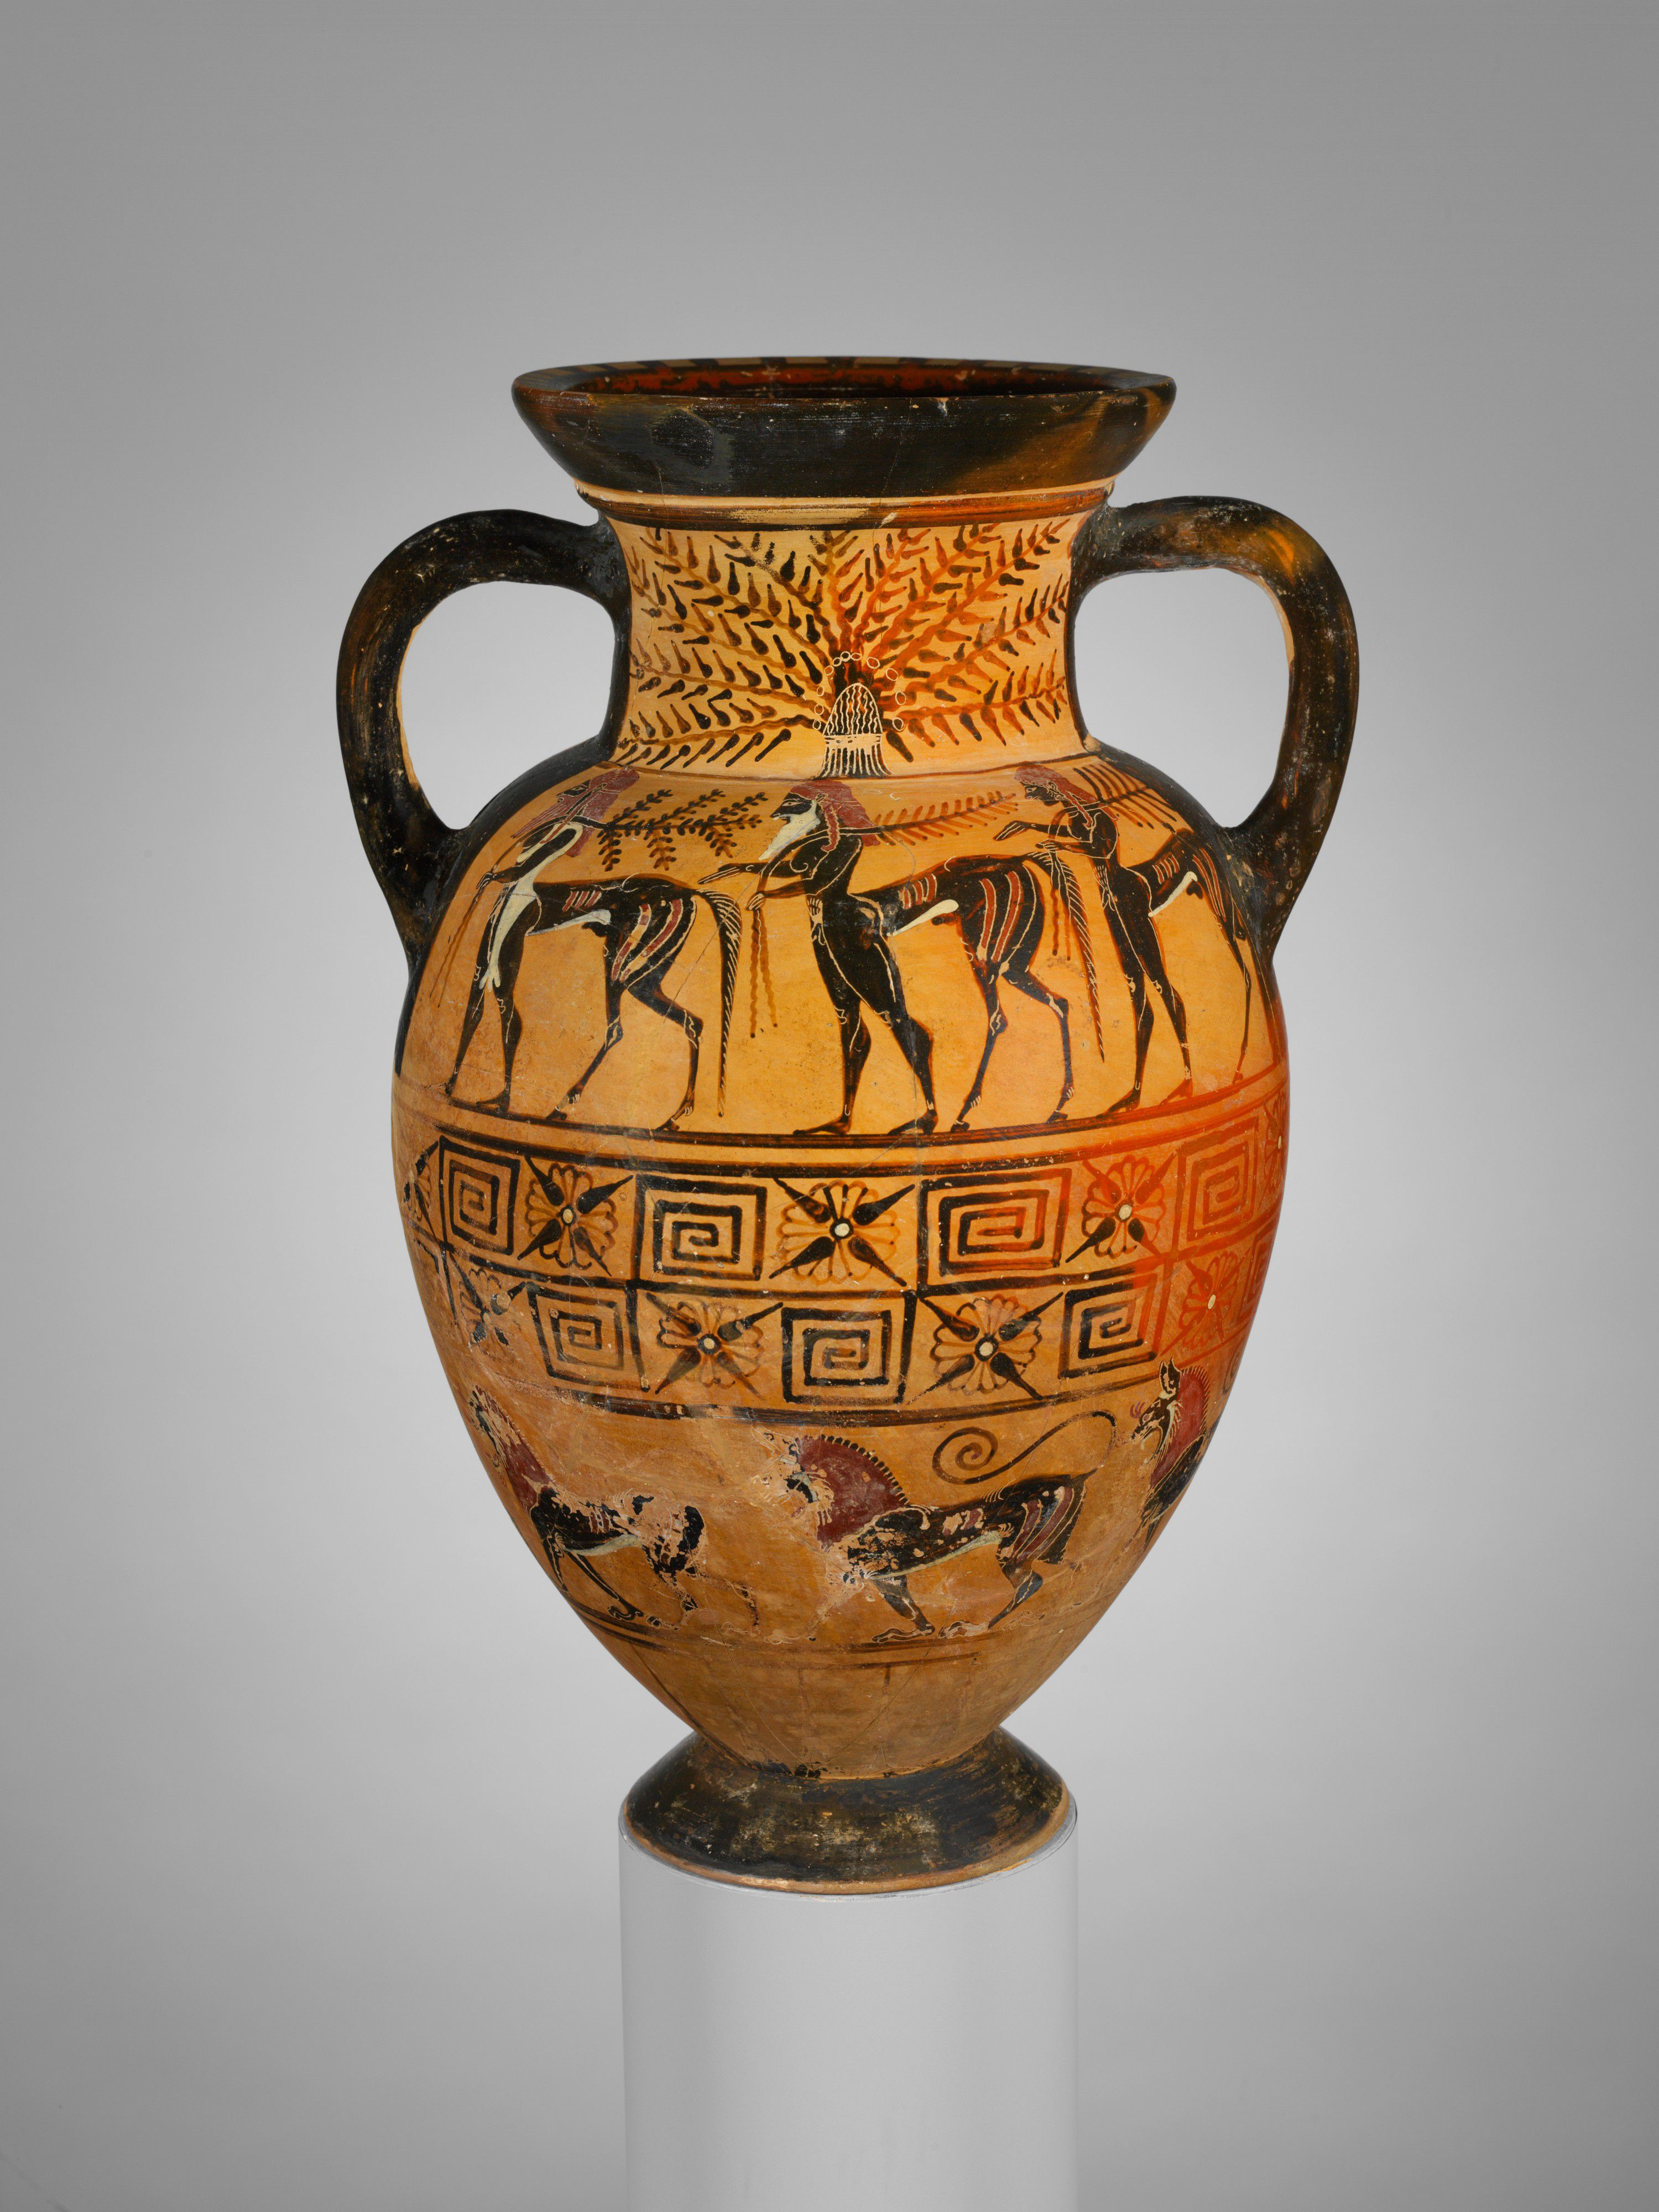 greek amphora vase of etruscan art stylistic innovations in ancient italy with etruscan vase 58a6f3725f9b58a3c919f238